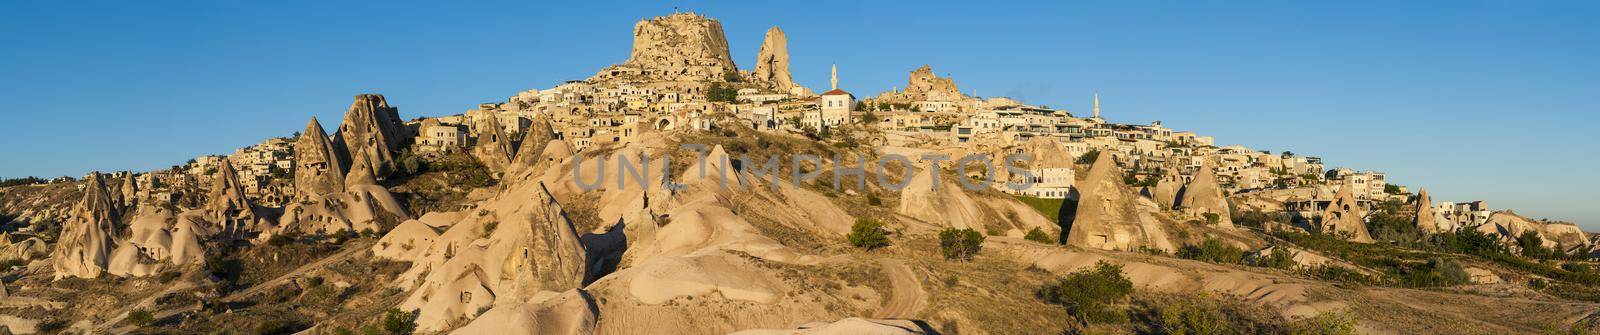 Uchisar town and castle in Cappadocia in Turkey by fyletto